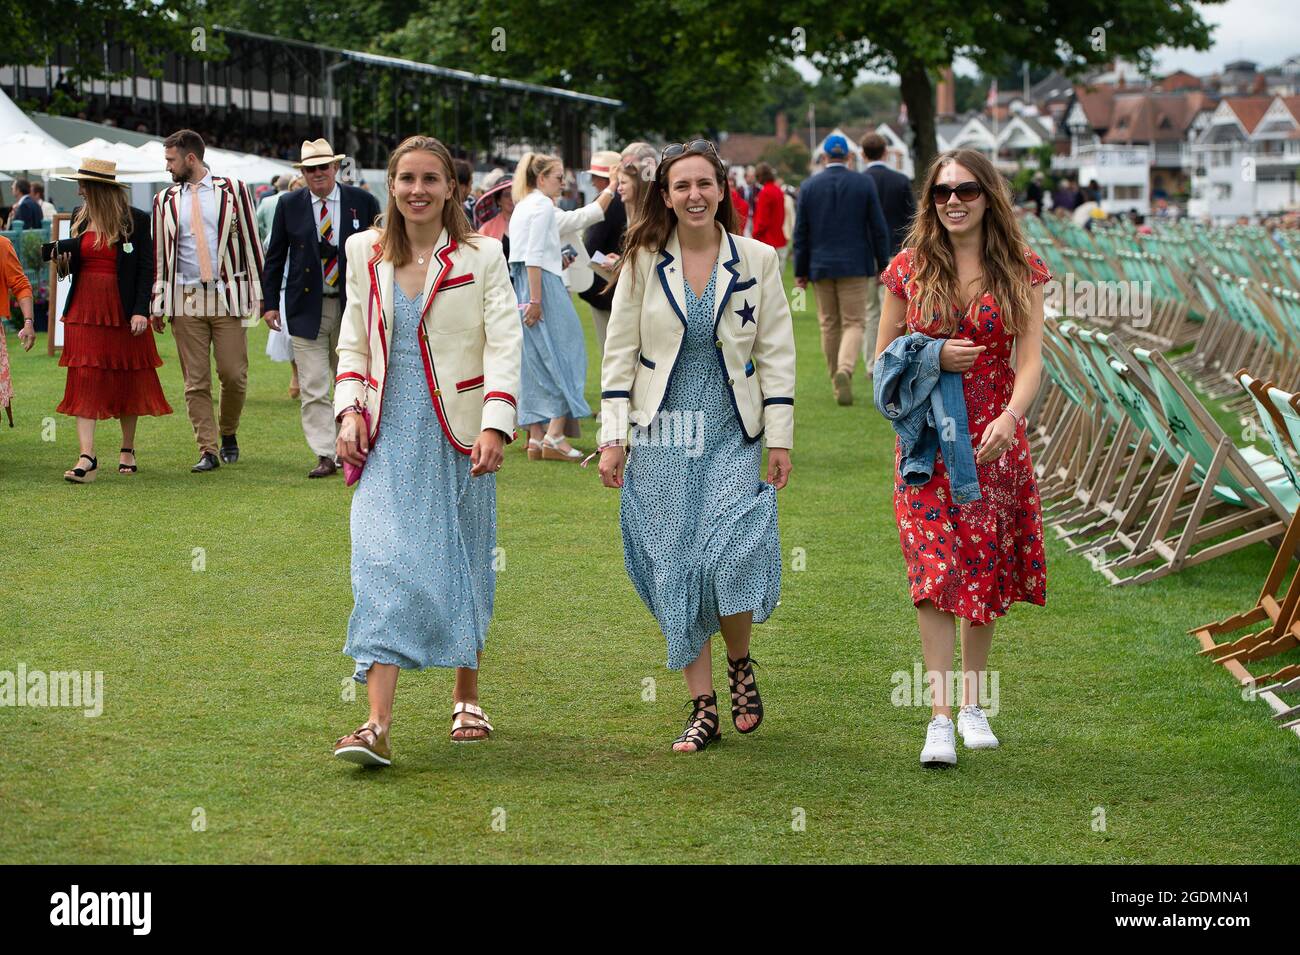 Henley, Oxfordshire, UK. 14th August, 2021. It was another busy day as  guests at Henley Royal Regatta enjoyed watching the rowing. The Dress Code  has been relaxed this year to allow ladies